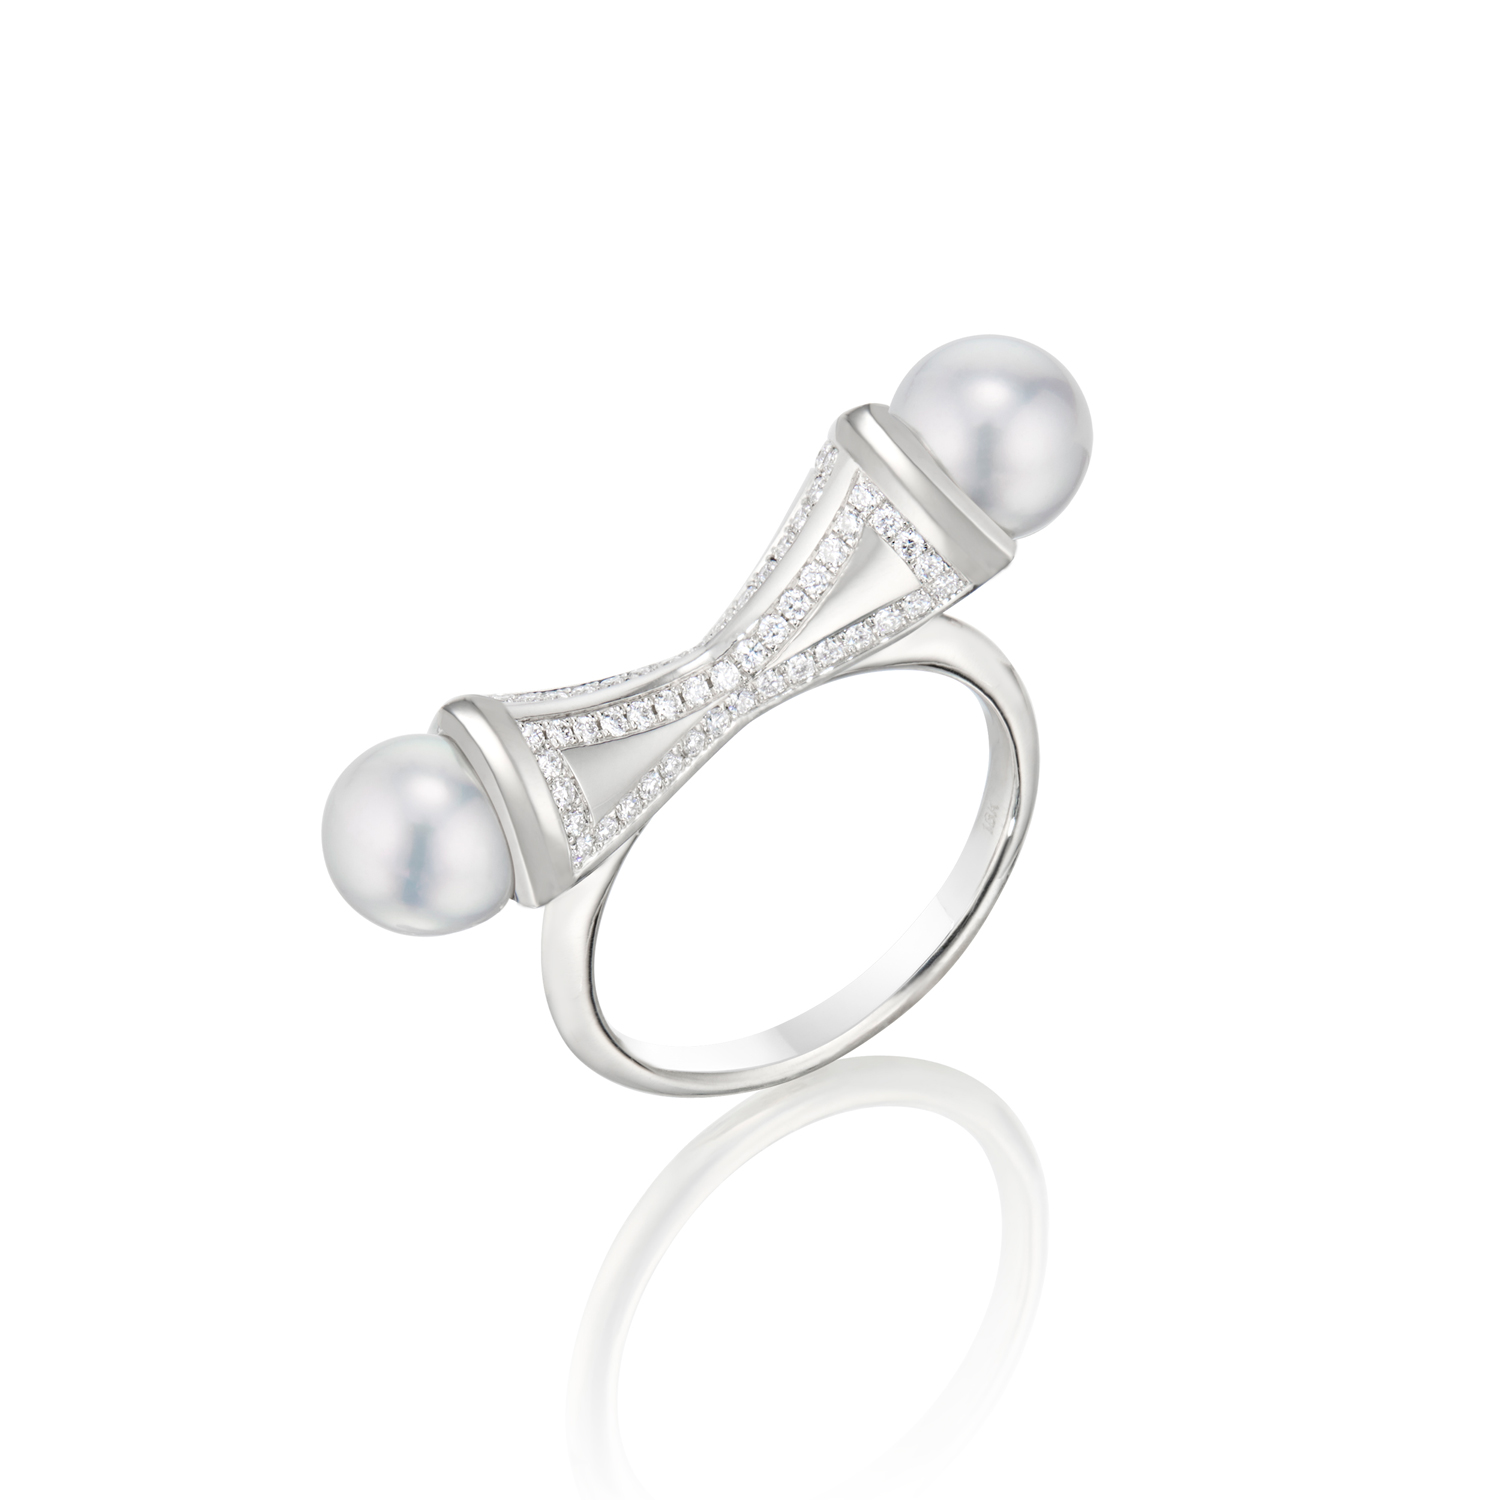 This is an overhead view of the Pearl Temple Bow Ring by Renisis. It is crafted in 18K white gold with blue Akoya Pearls and diamond patterns